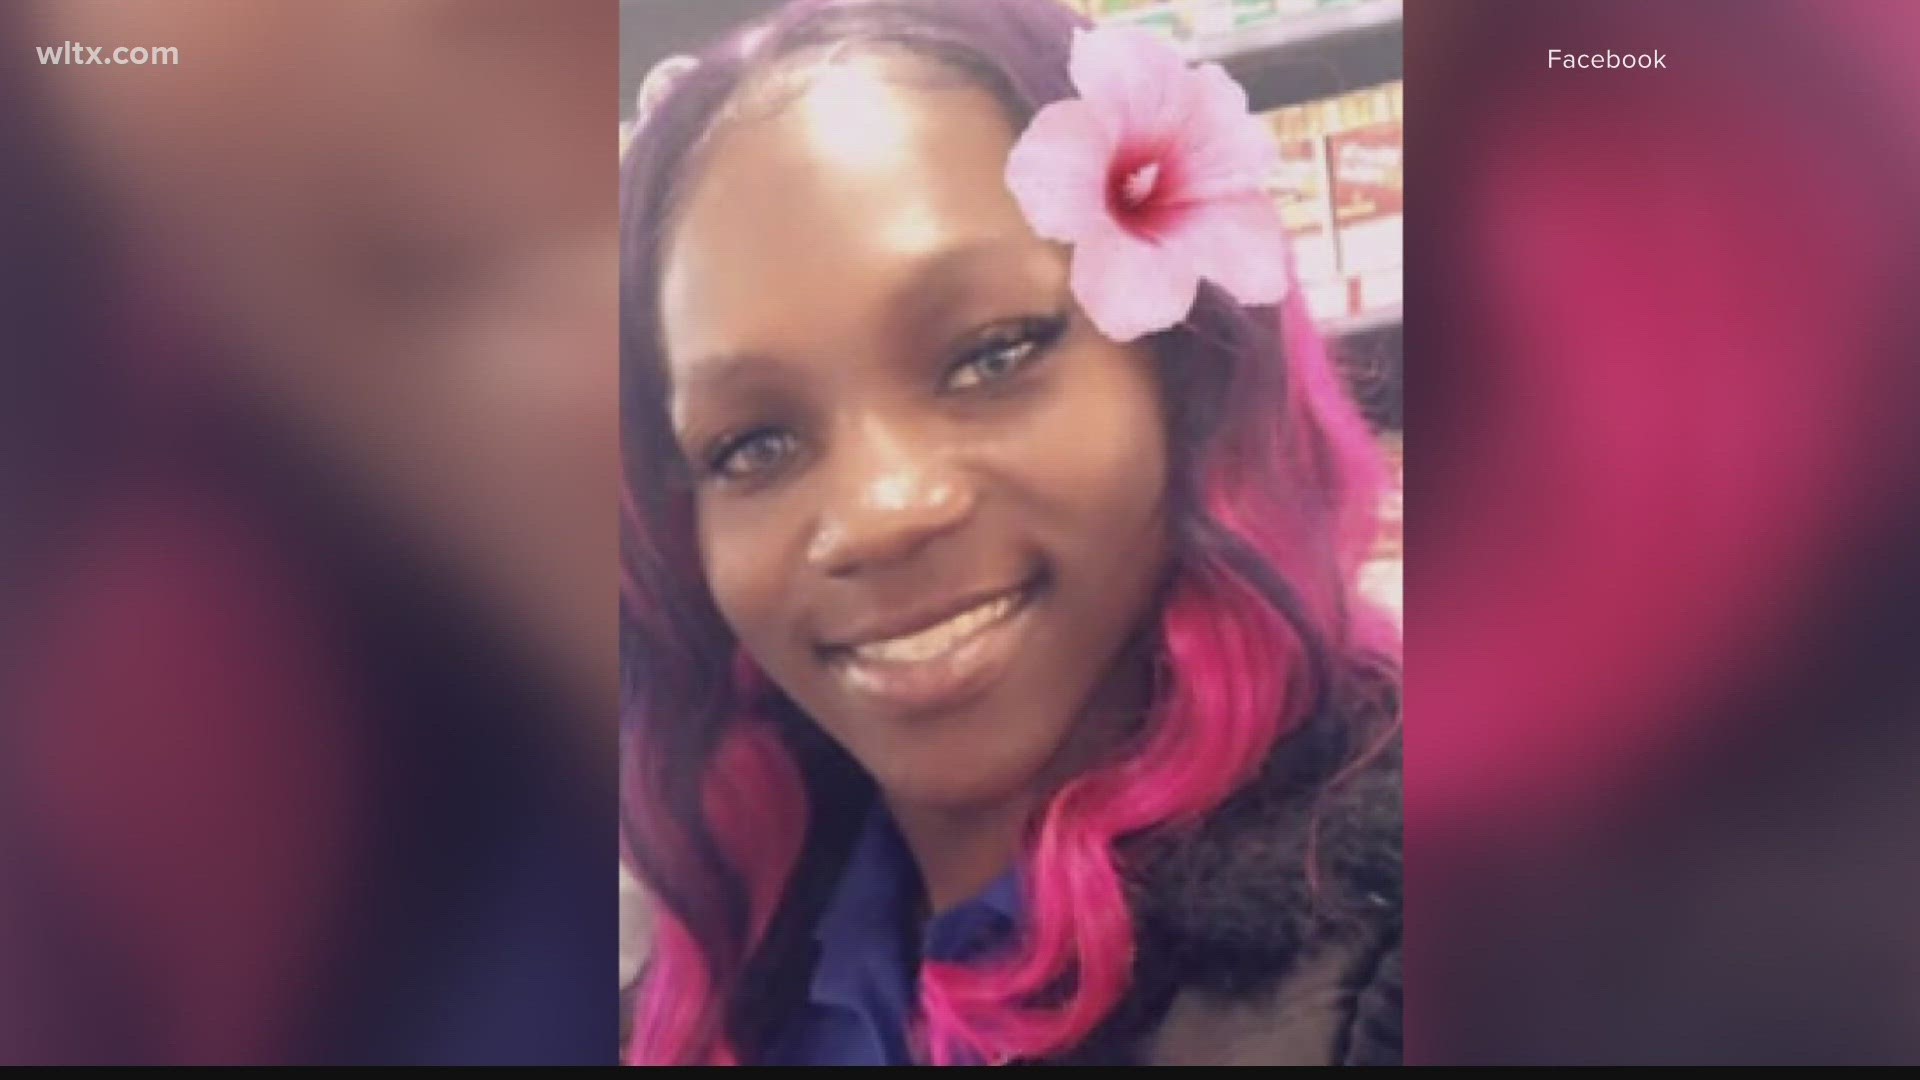 DaQua Ritter was on trial in connection with the murder of transgender woman LaDime Doe.